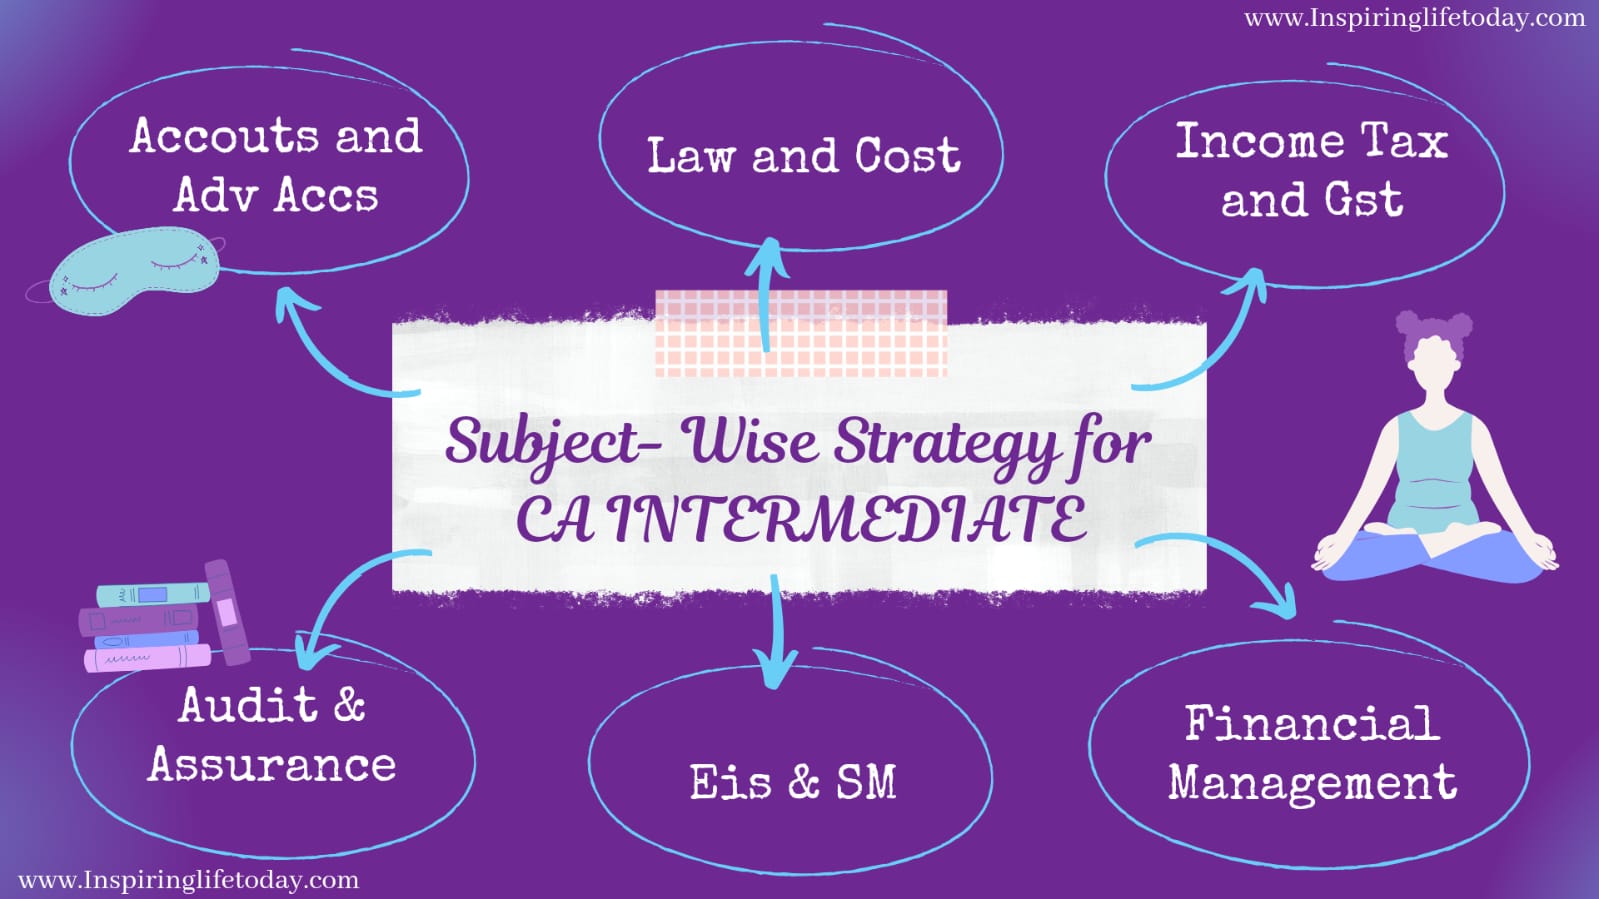 Subject-wise strategy for CA INTERMEDIATE